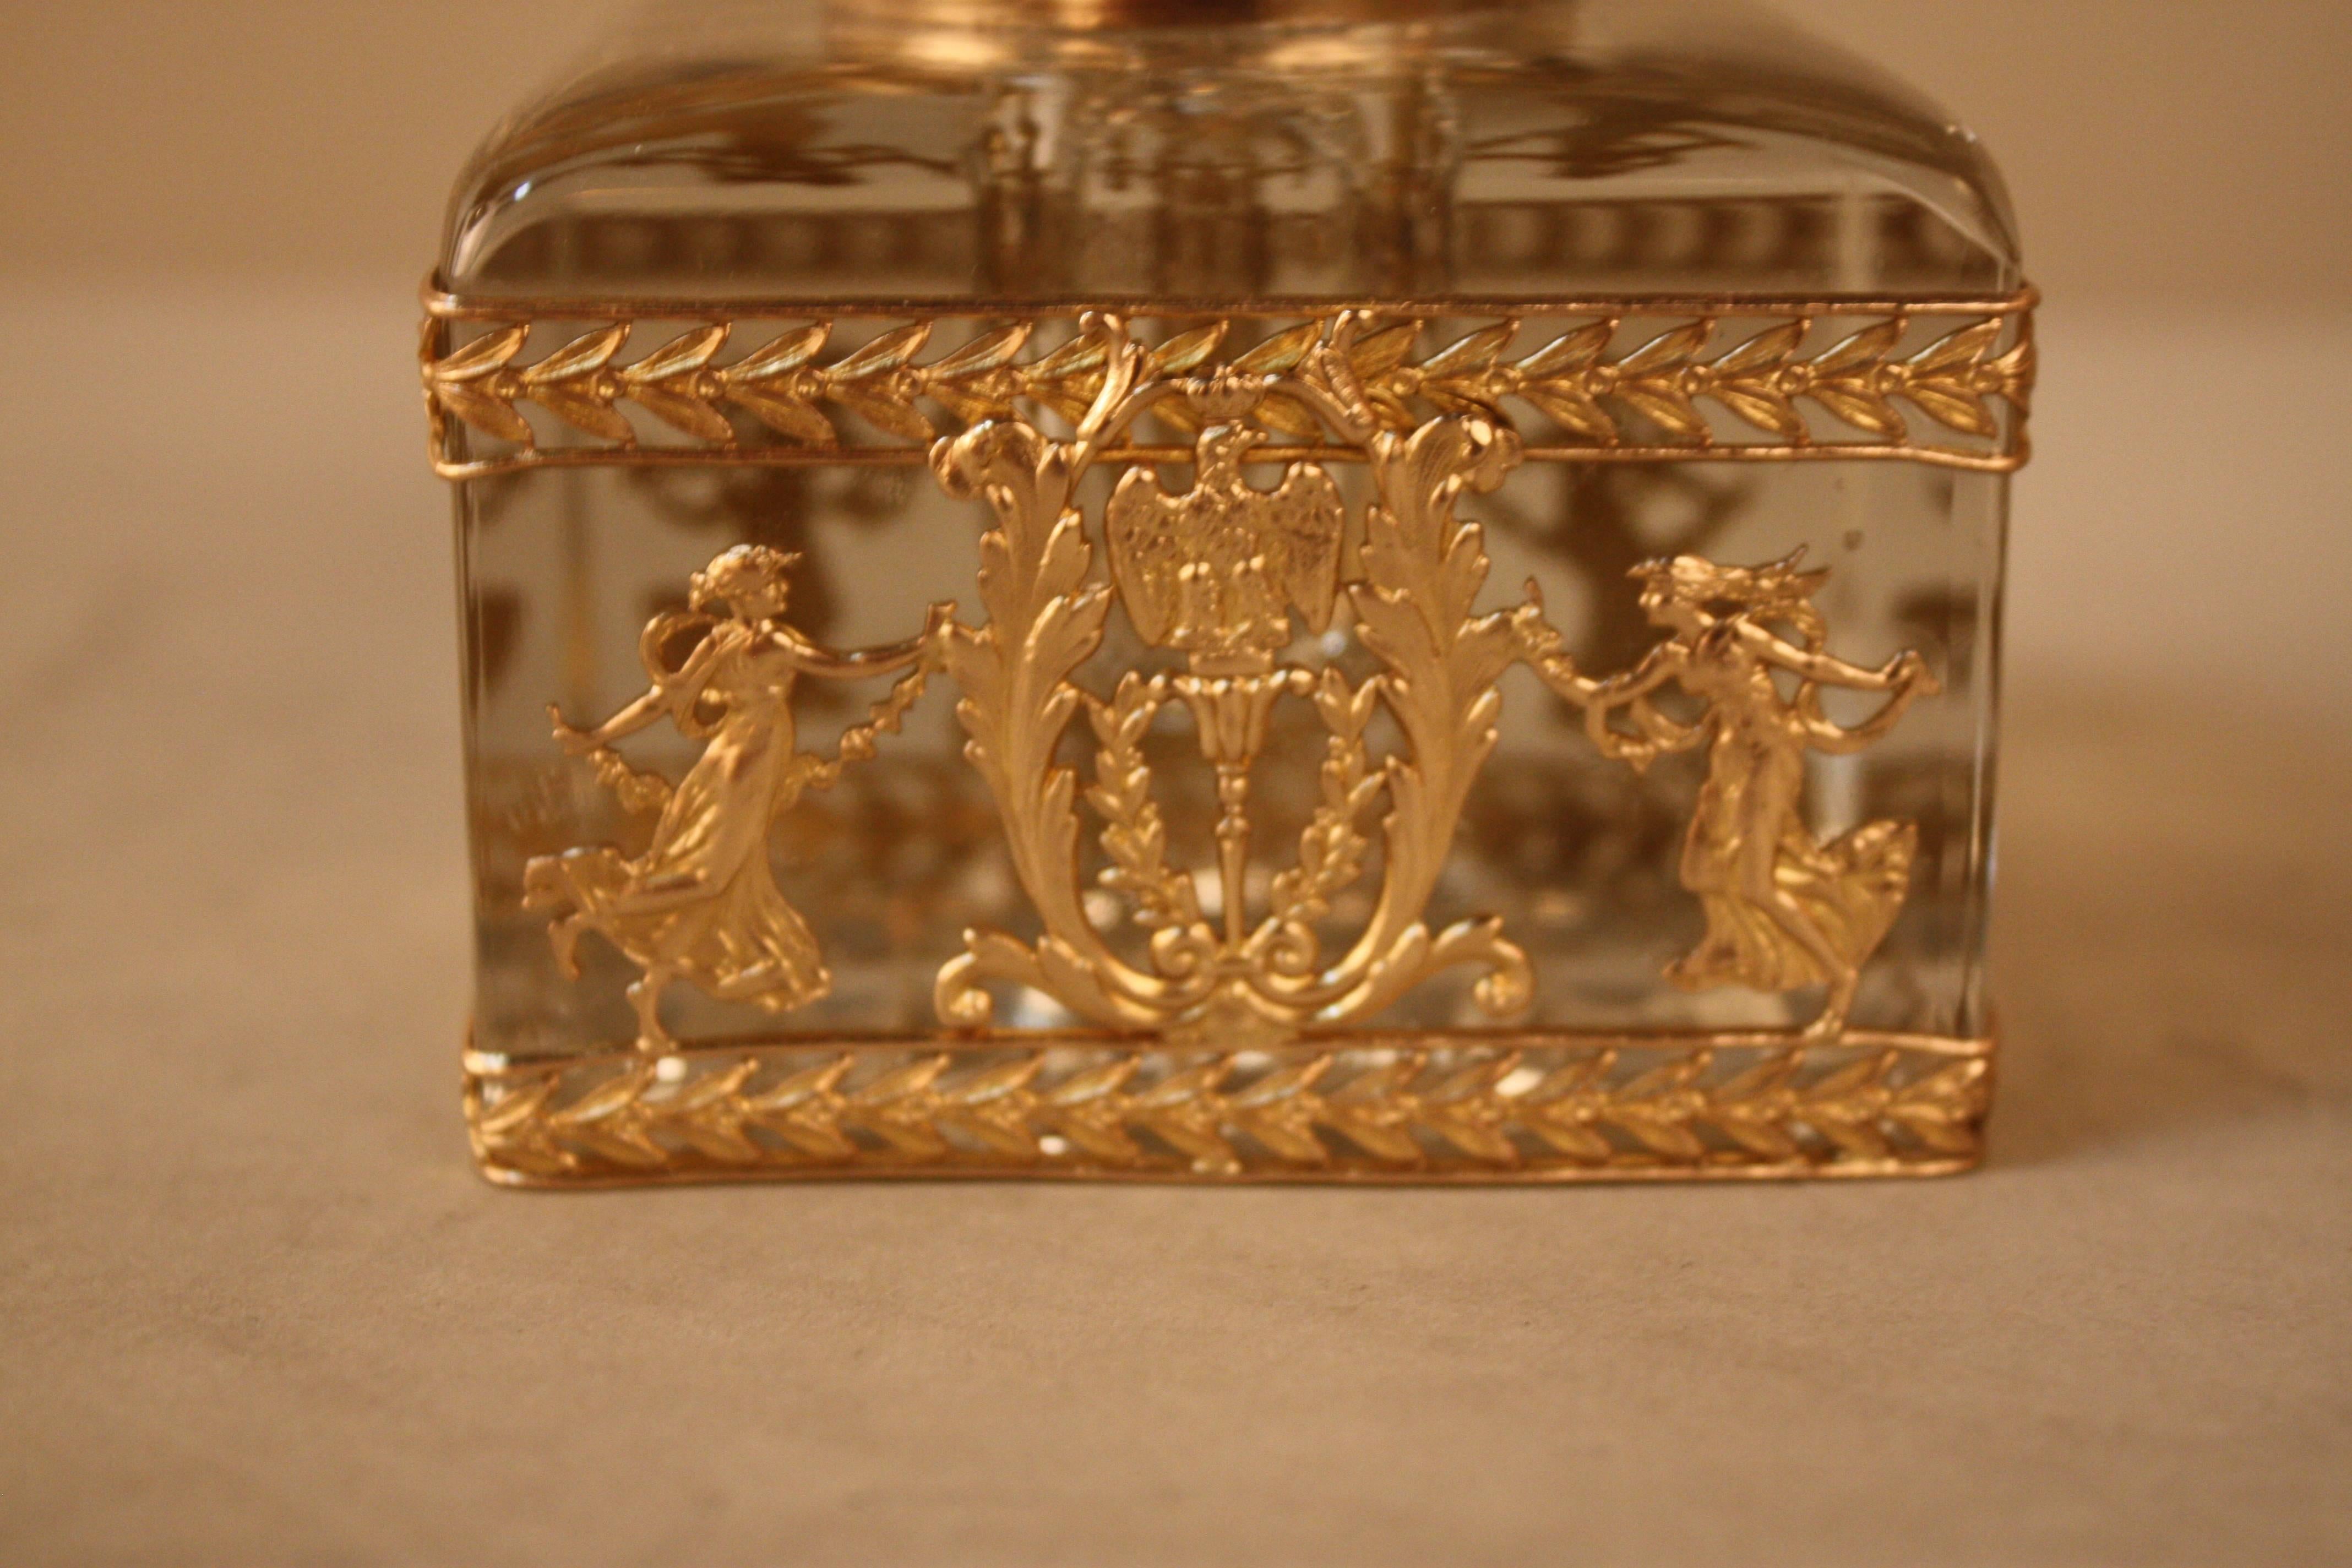 French 19th century Empire style bronze and Baccarat crystal inkwell.